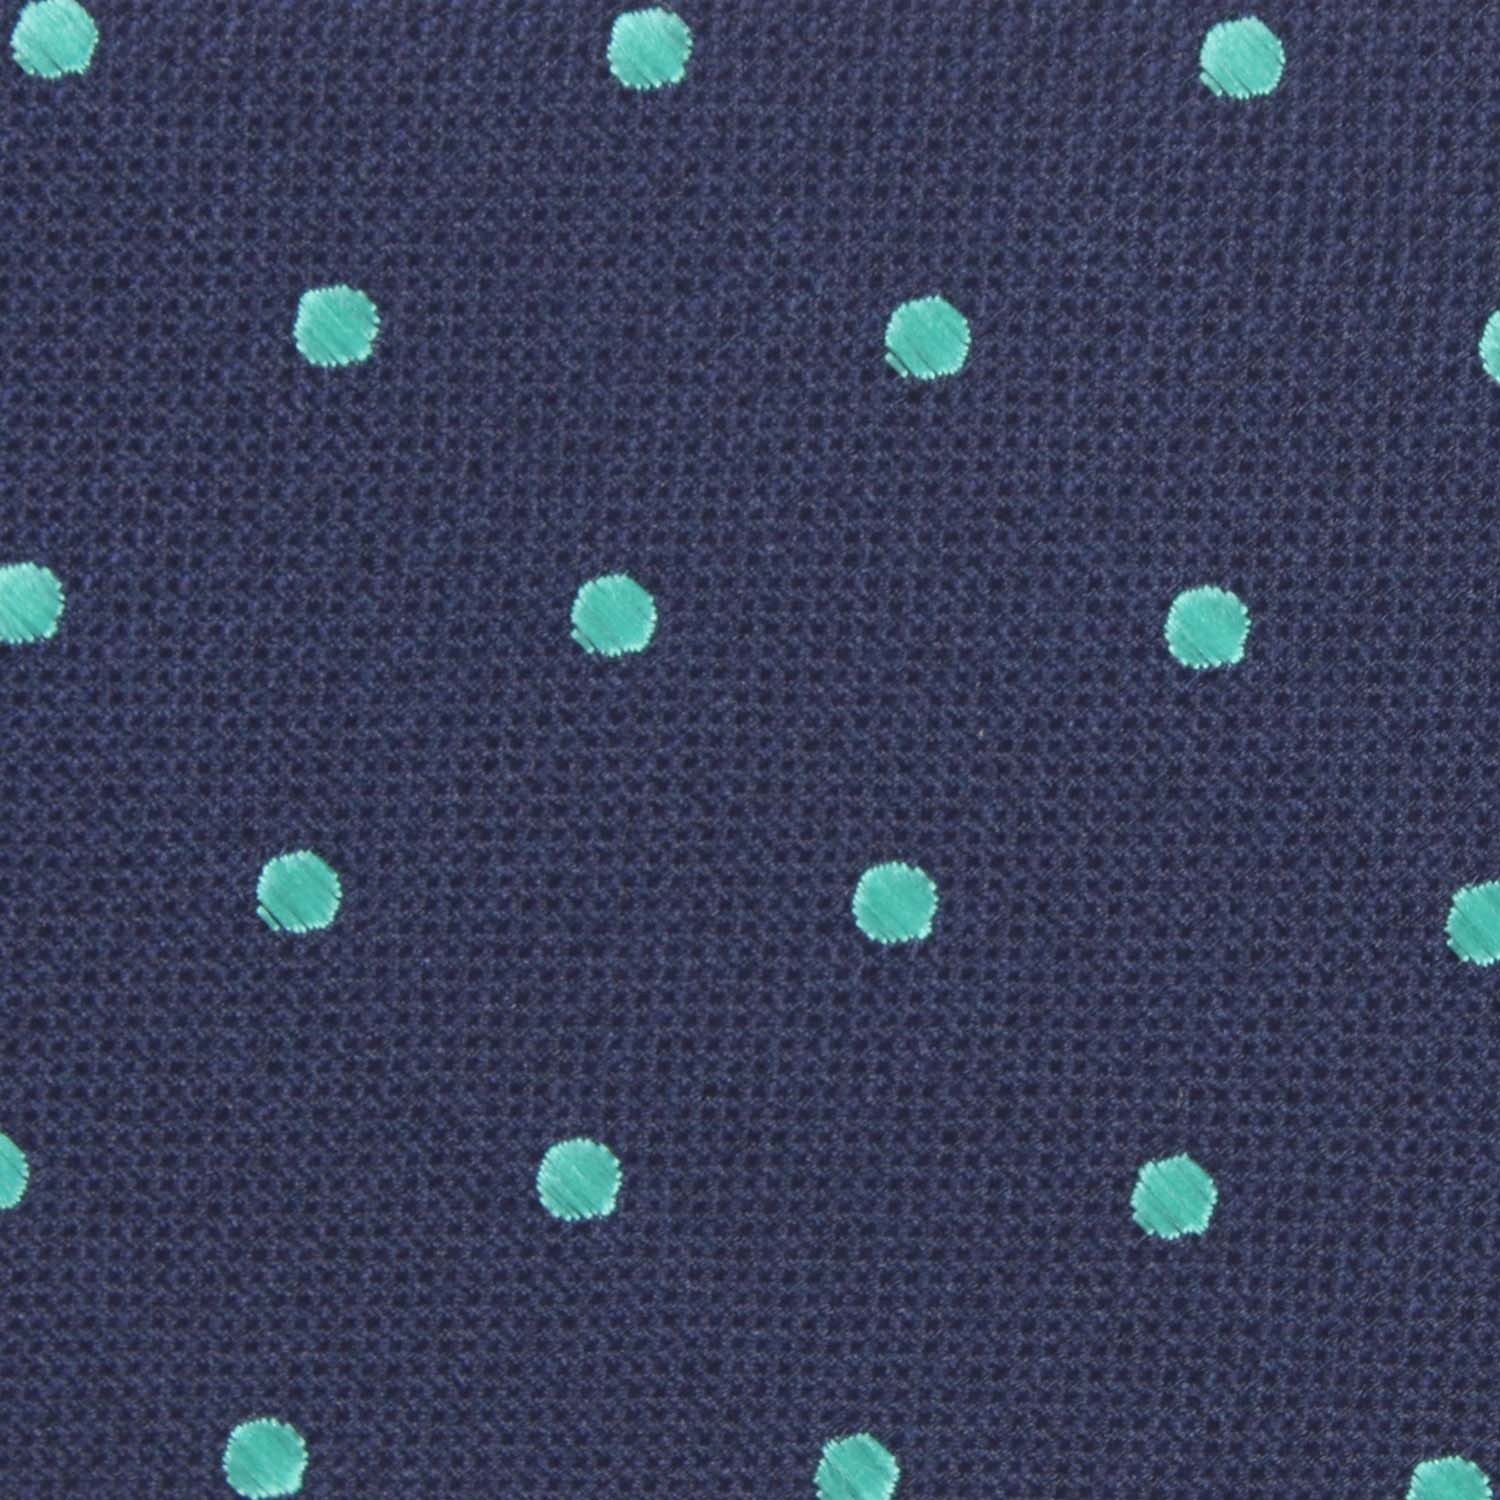 Navy Blue with Mint Green Polka Dots Fabric Necktie M126Navy Blue with Mint Green Polka Dots Fabric Necktie M126